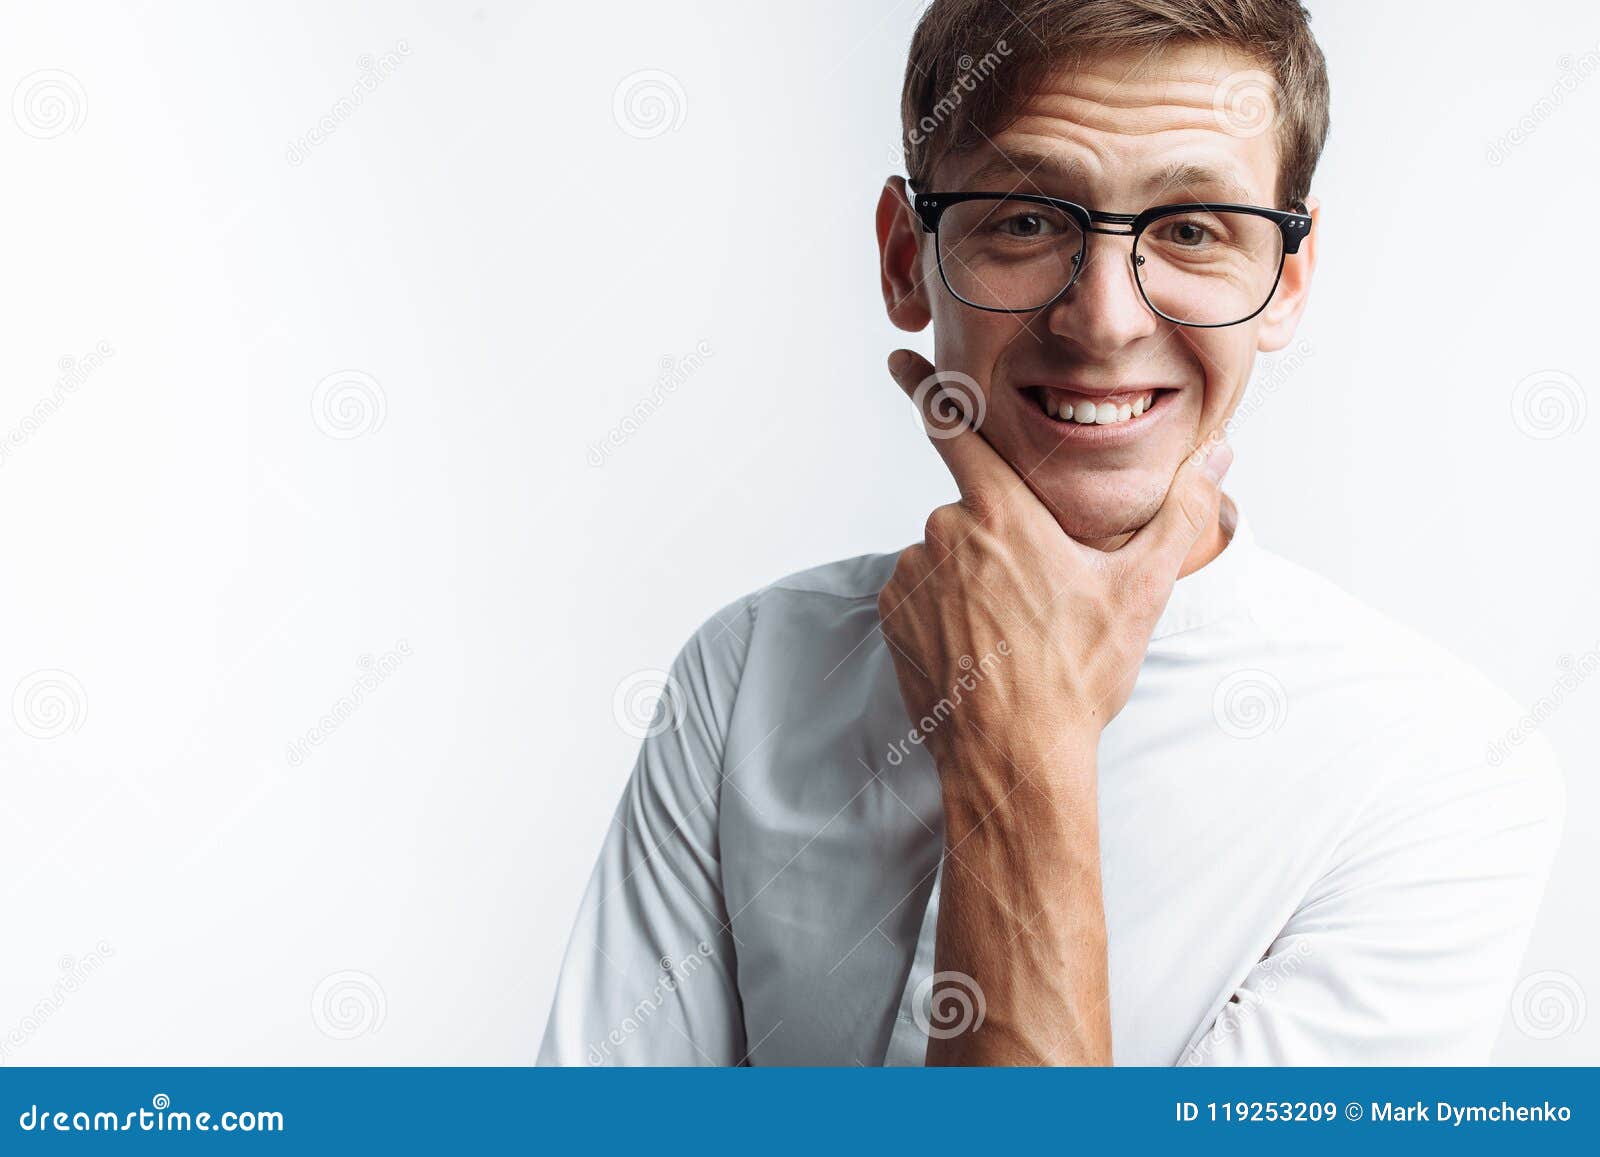 Portrait Of Young Attractive Guy In Glasses Depicting Joy ...